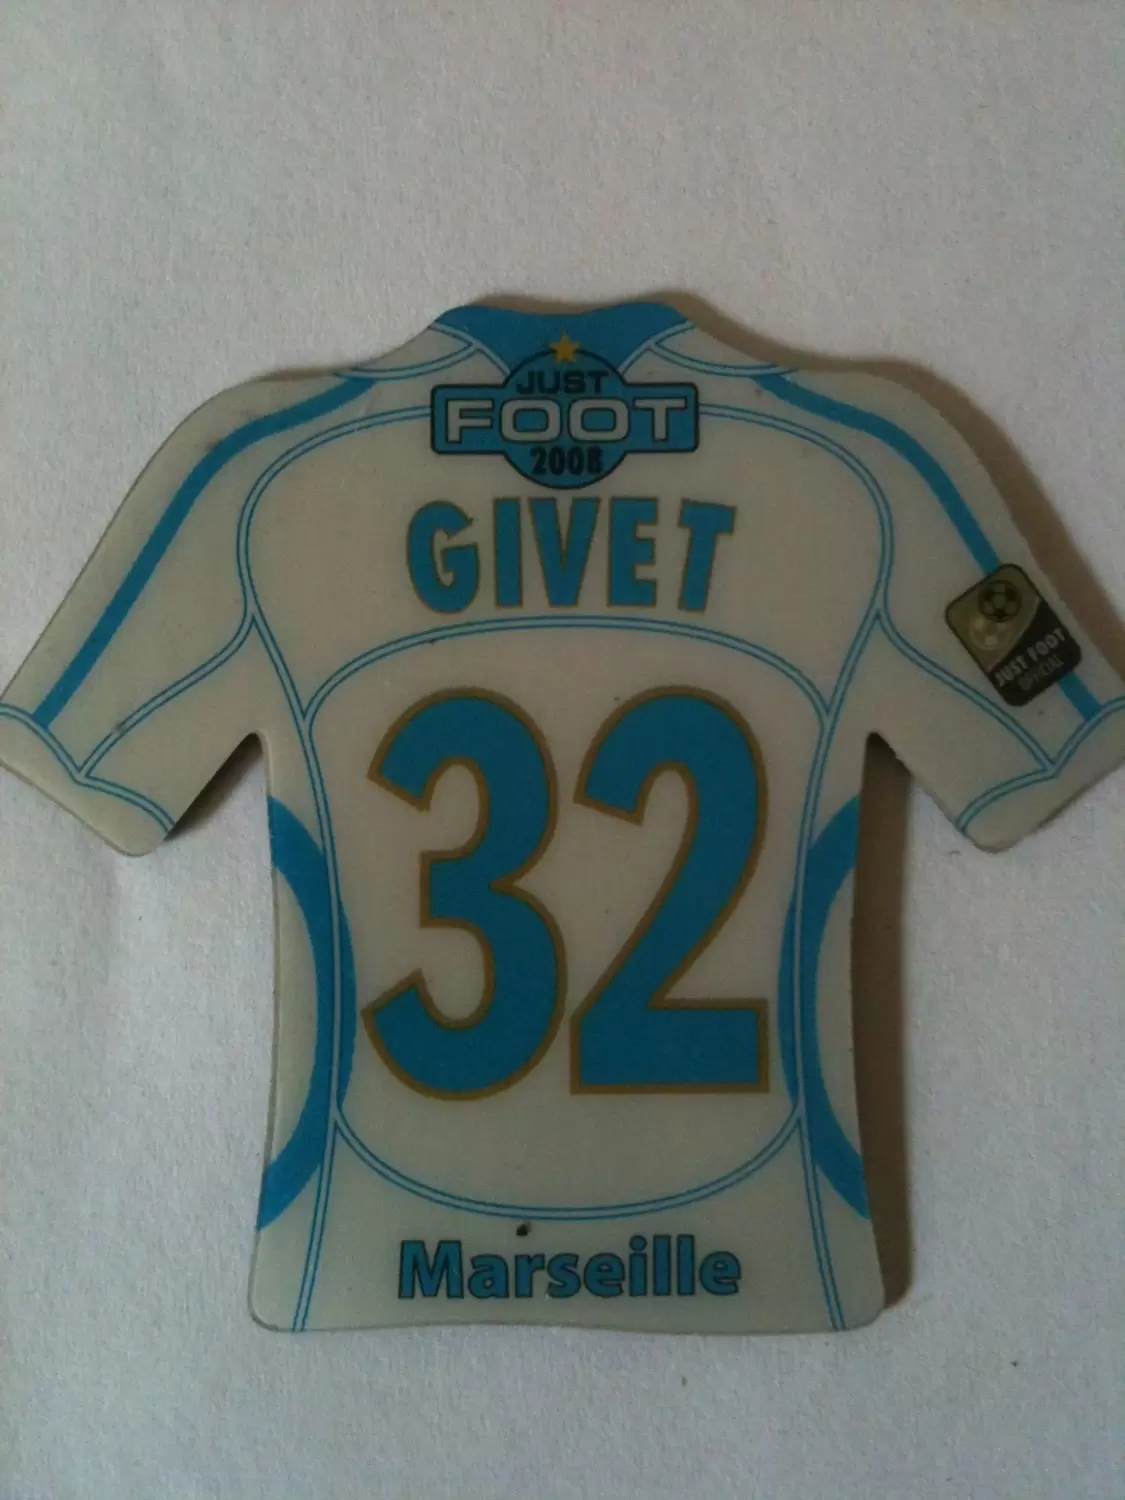 Just Foot 2008 - Marseille 32 - Givet